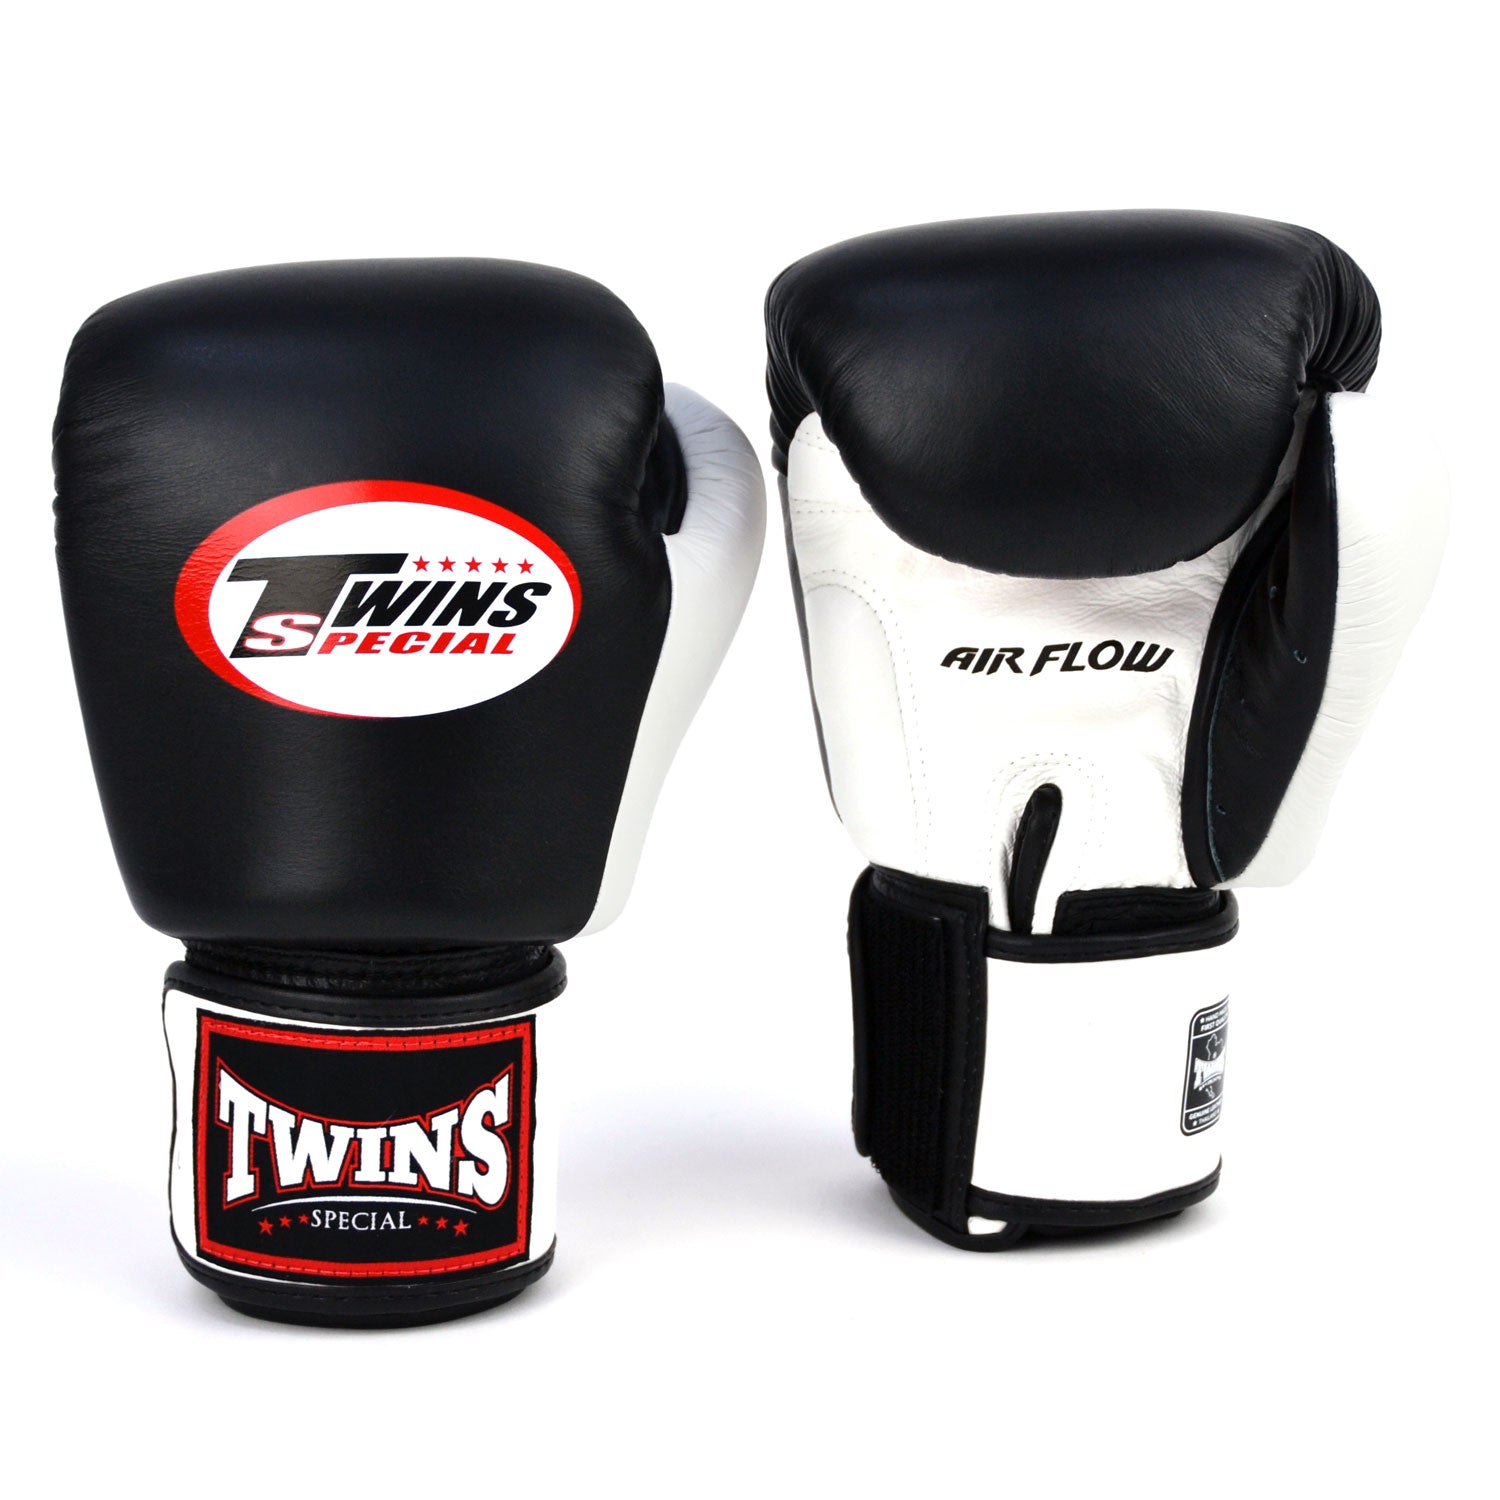 Image of BGVLA2-2T Twins Air Flow Boxing Gloves Black-White-Red